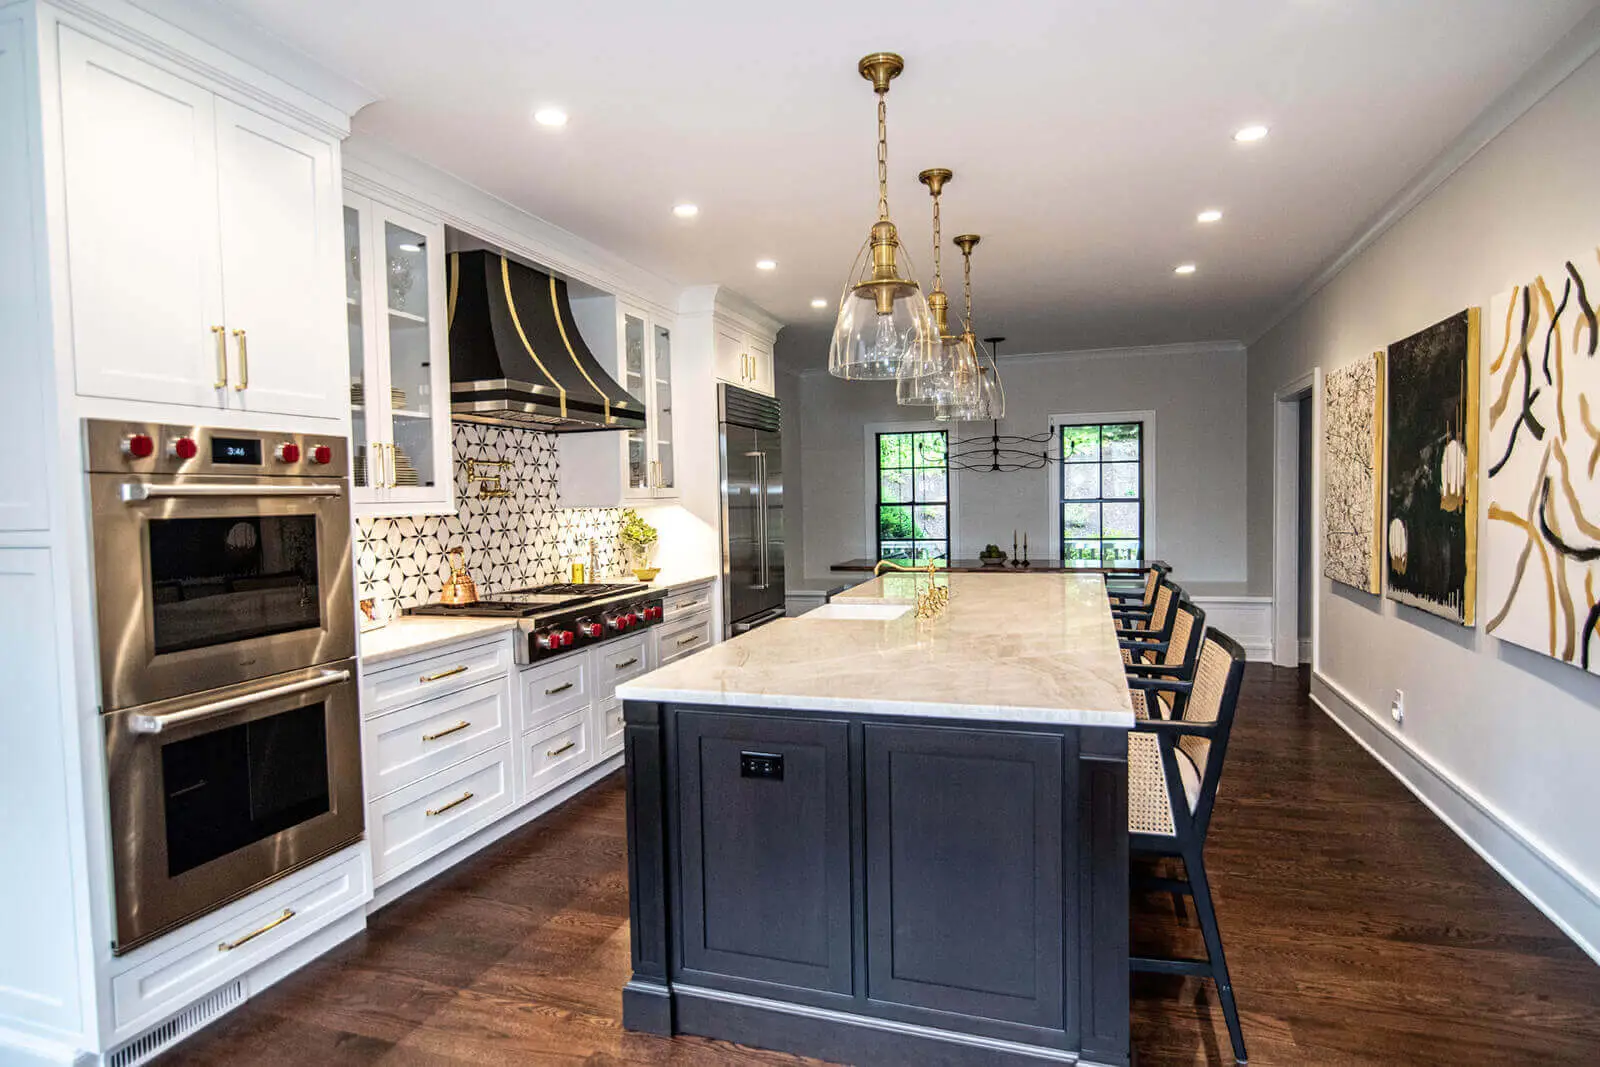 The Best Kitchen Renovation Company In The Area